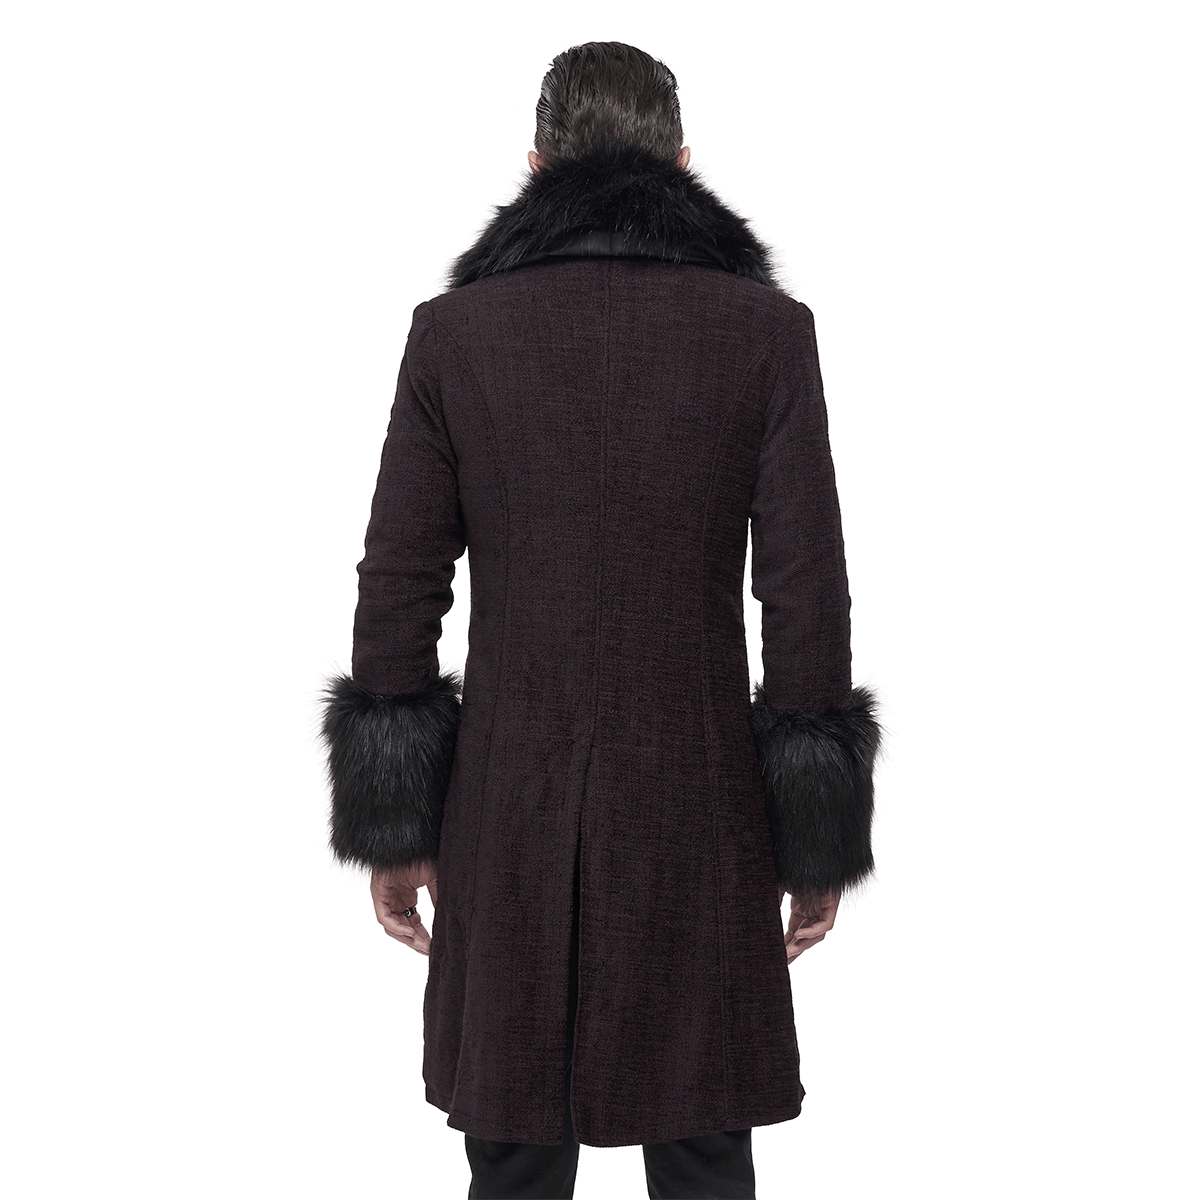 Gothic Burgundy Zipper Coat with Detachable Faux Fur / Men's Mid-Length Coat with Buttons - HARD'N'HEAVY